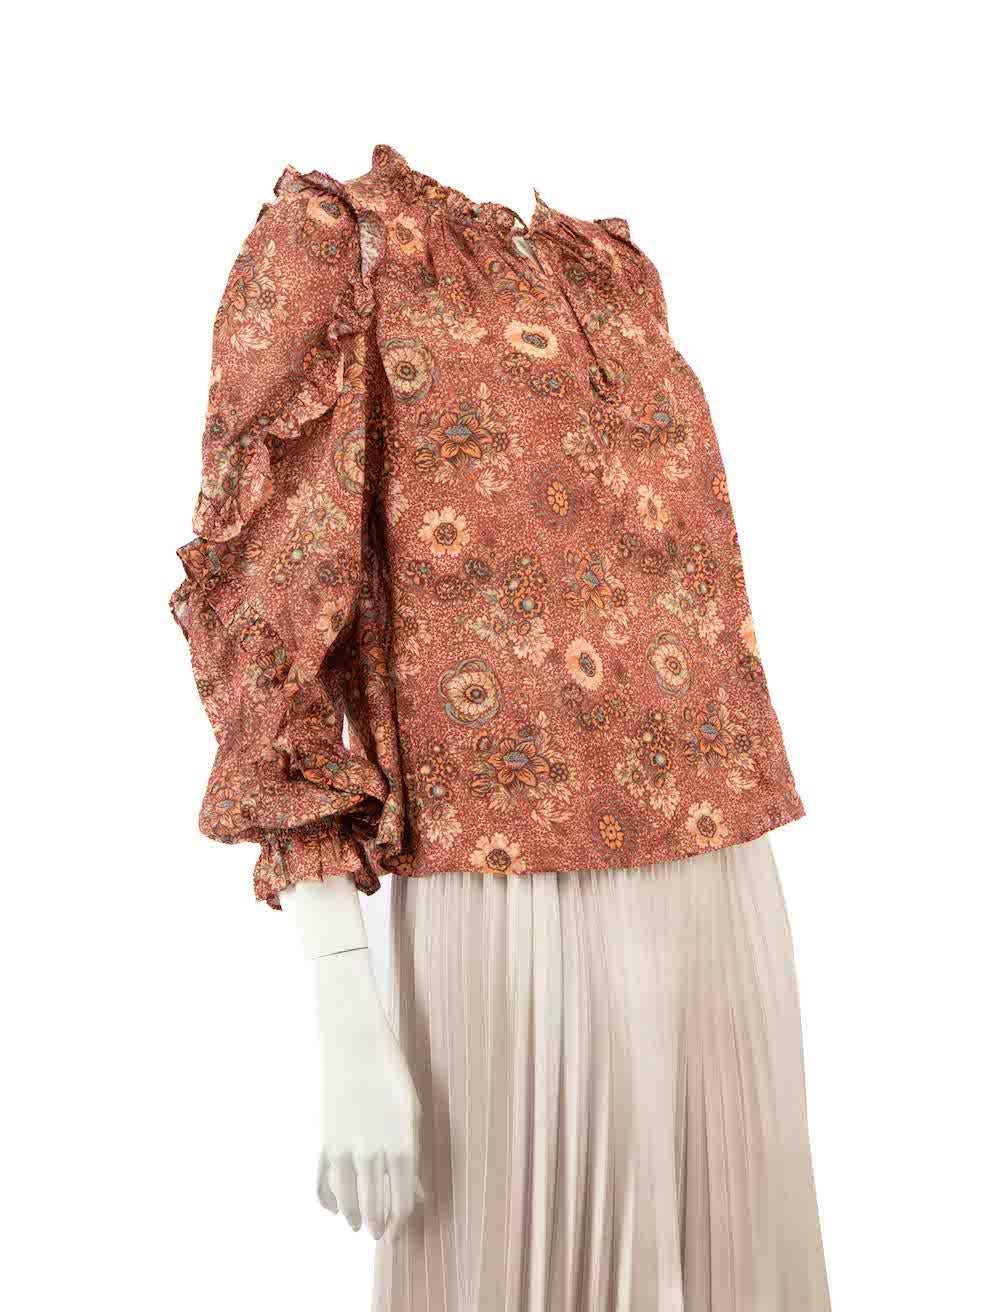 CONDITION is Very good. Hardly any visible wear to blouse is evident on this used Ulla Johnson designer resale item.
 
 
 
 Details
 
 
 Brown
 
 Cotton
 
 Top
 
 Floral print
 
 Long sleeves
 
 Ruffle detail
 
 Neck tie detail
 
 
 
 
 
 Made in